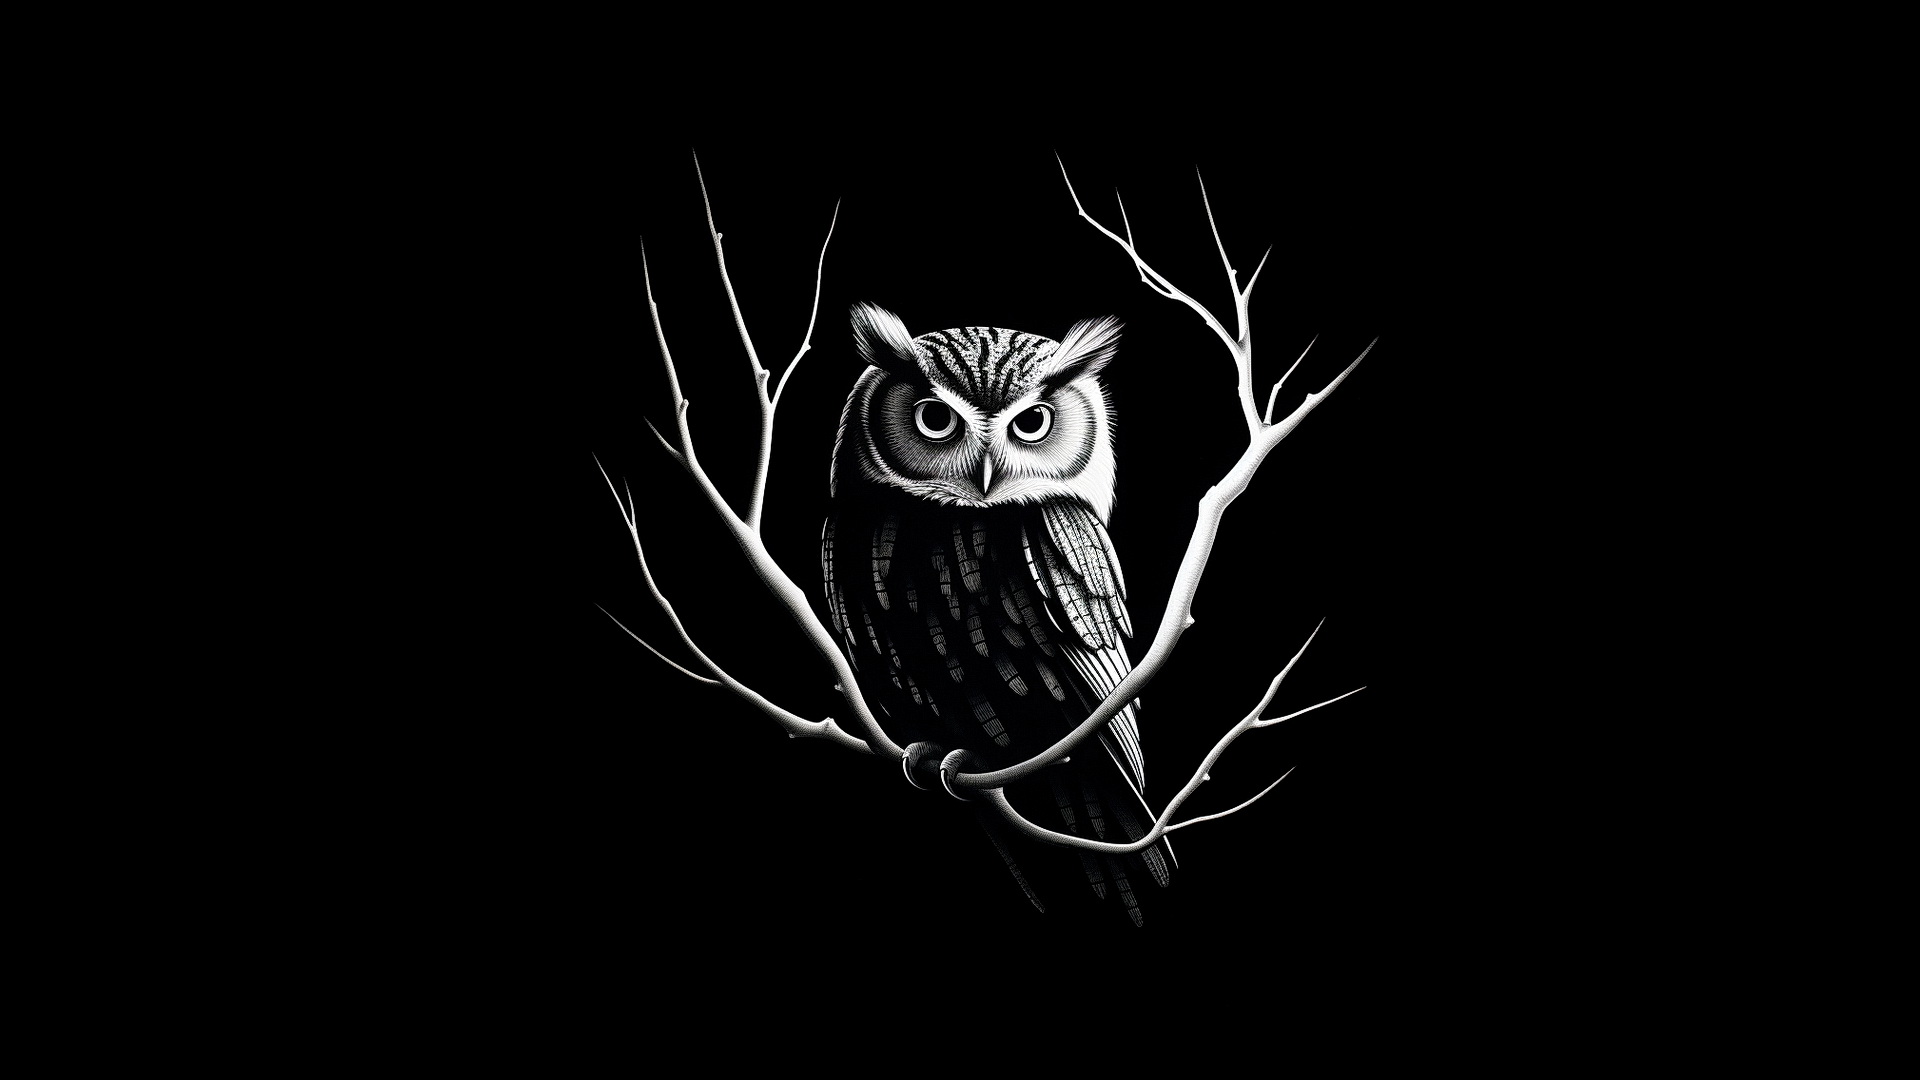 Drawing of an owl sitting on a branch on a black background